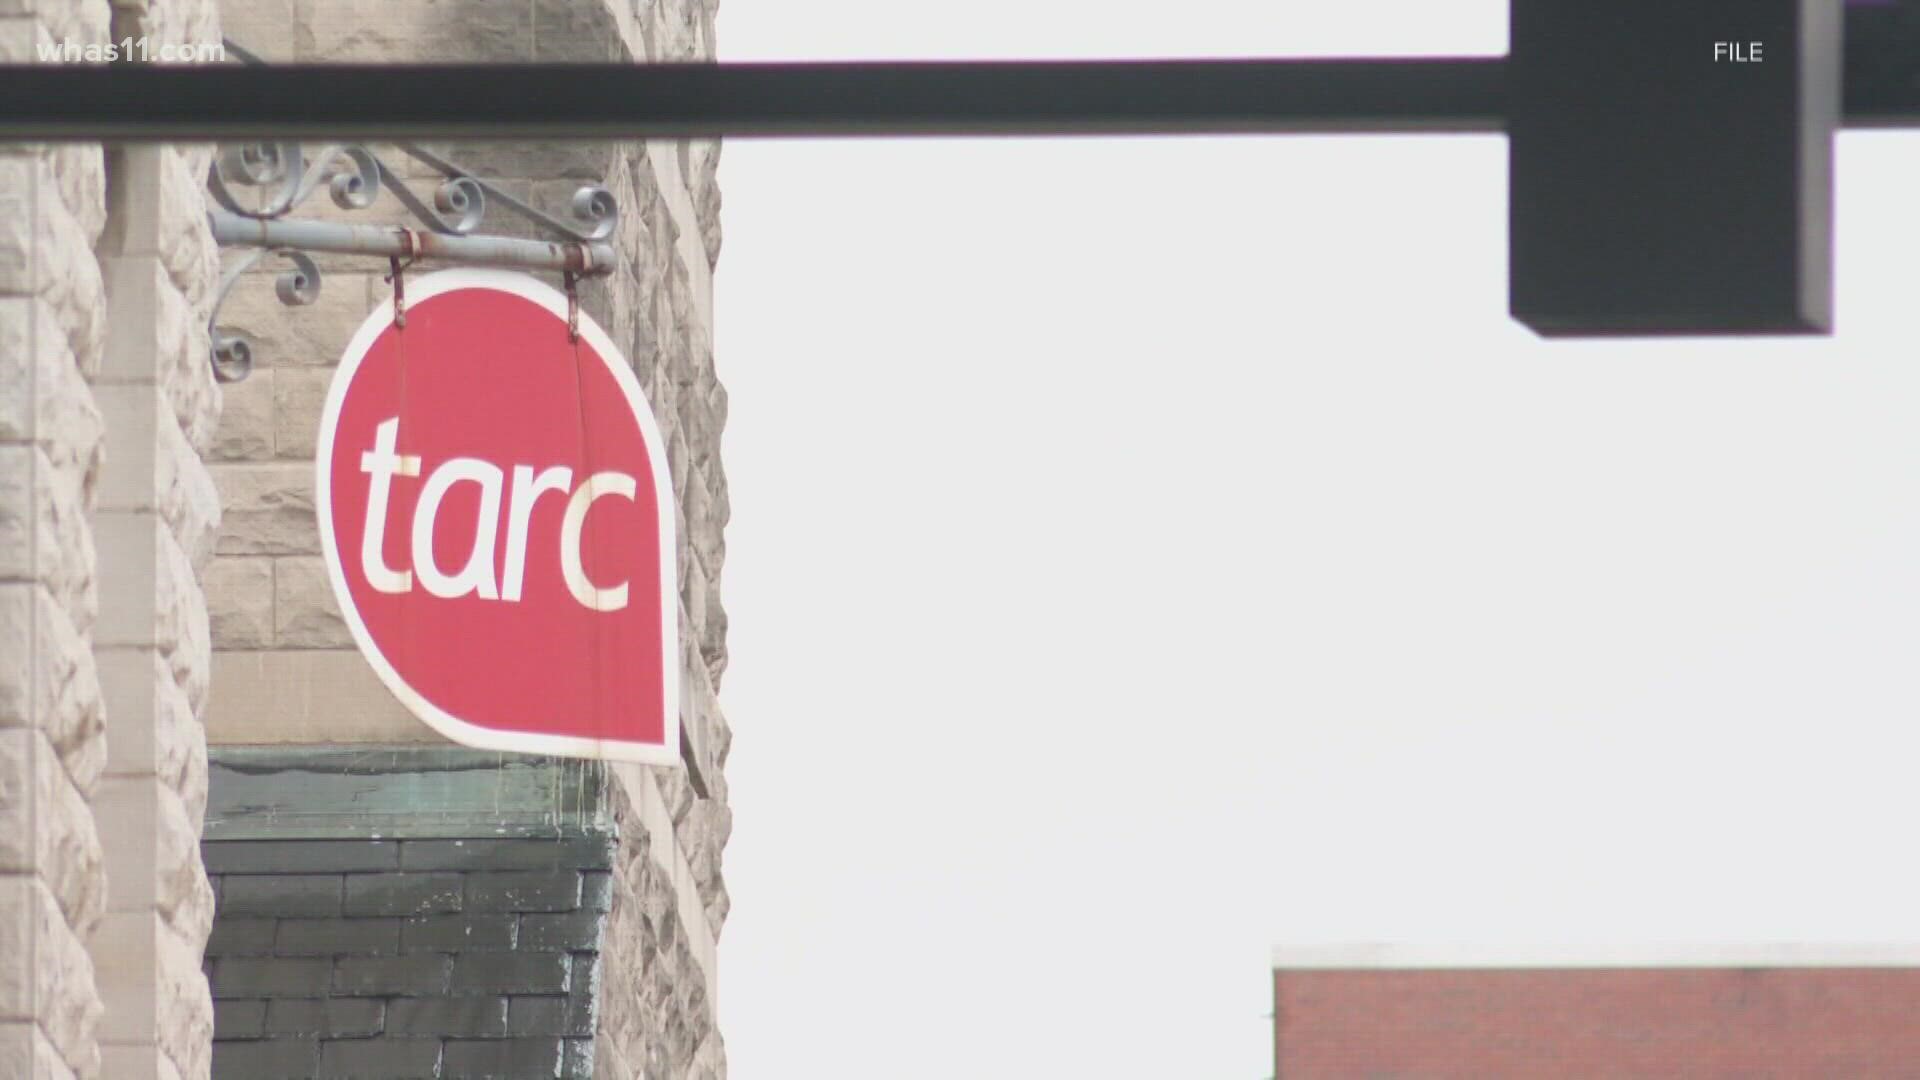 One rider said she often experiences rides showing up late, or not at all. TARC officials say they and their contractor are working on recruitment.